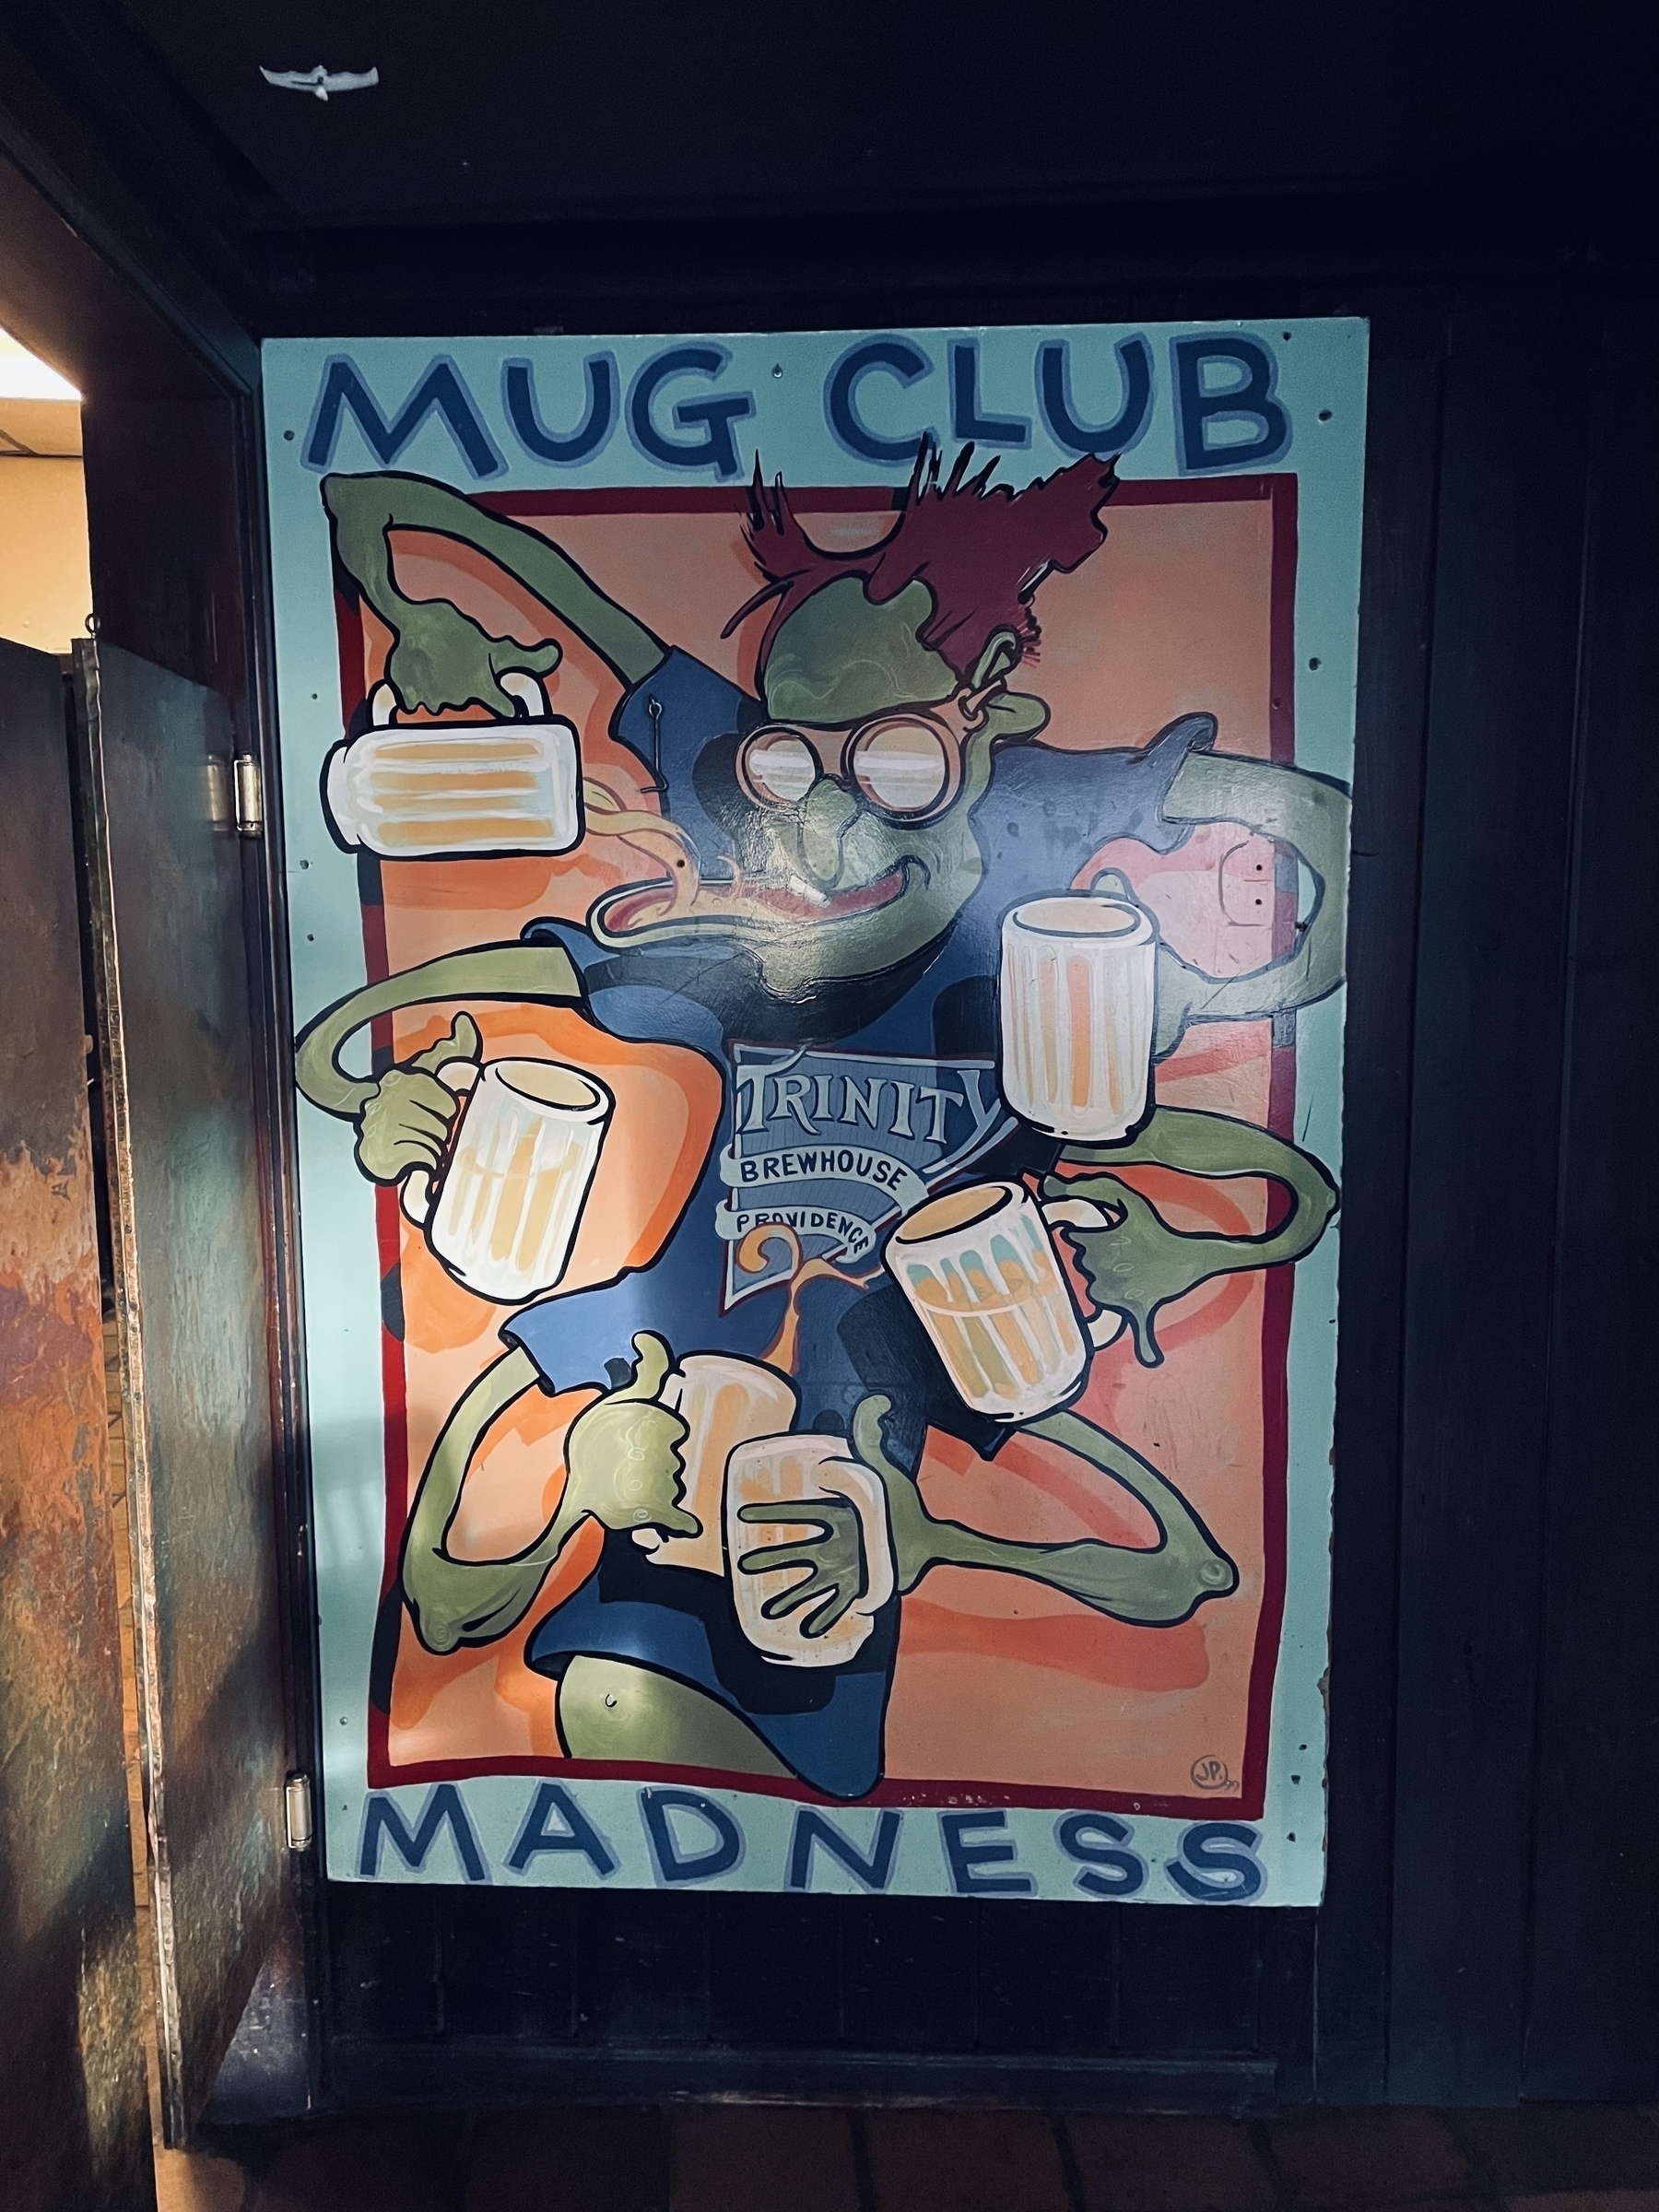 A painted wall art of a six-armed green monster, a pint of beer in each hand, wearing a blue T-shirt with the Trinity Brewhouse logo. Above and below the picture are the words “Mug House Madness”.